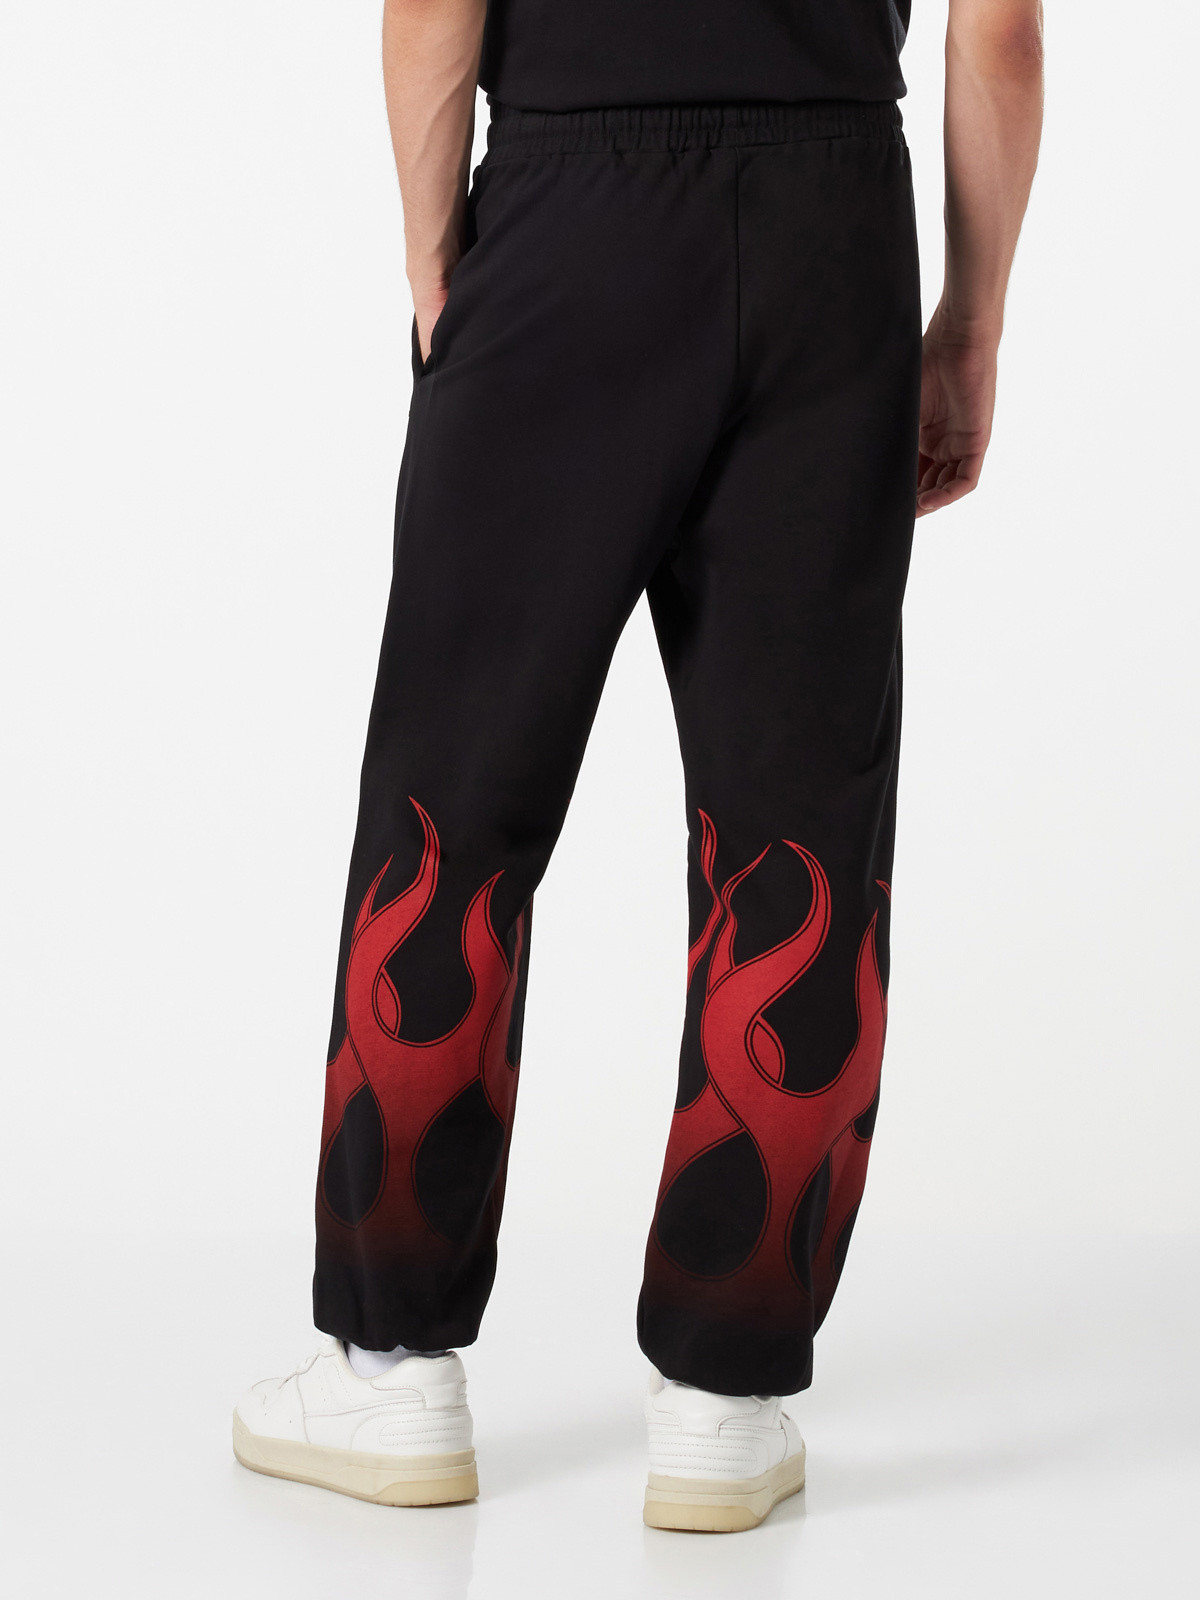 Vision of Super - Pants with racing flames, Black, large image number 4